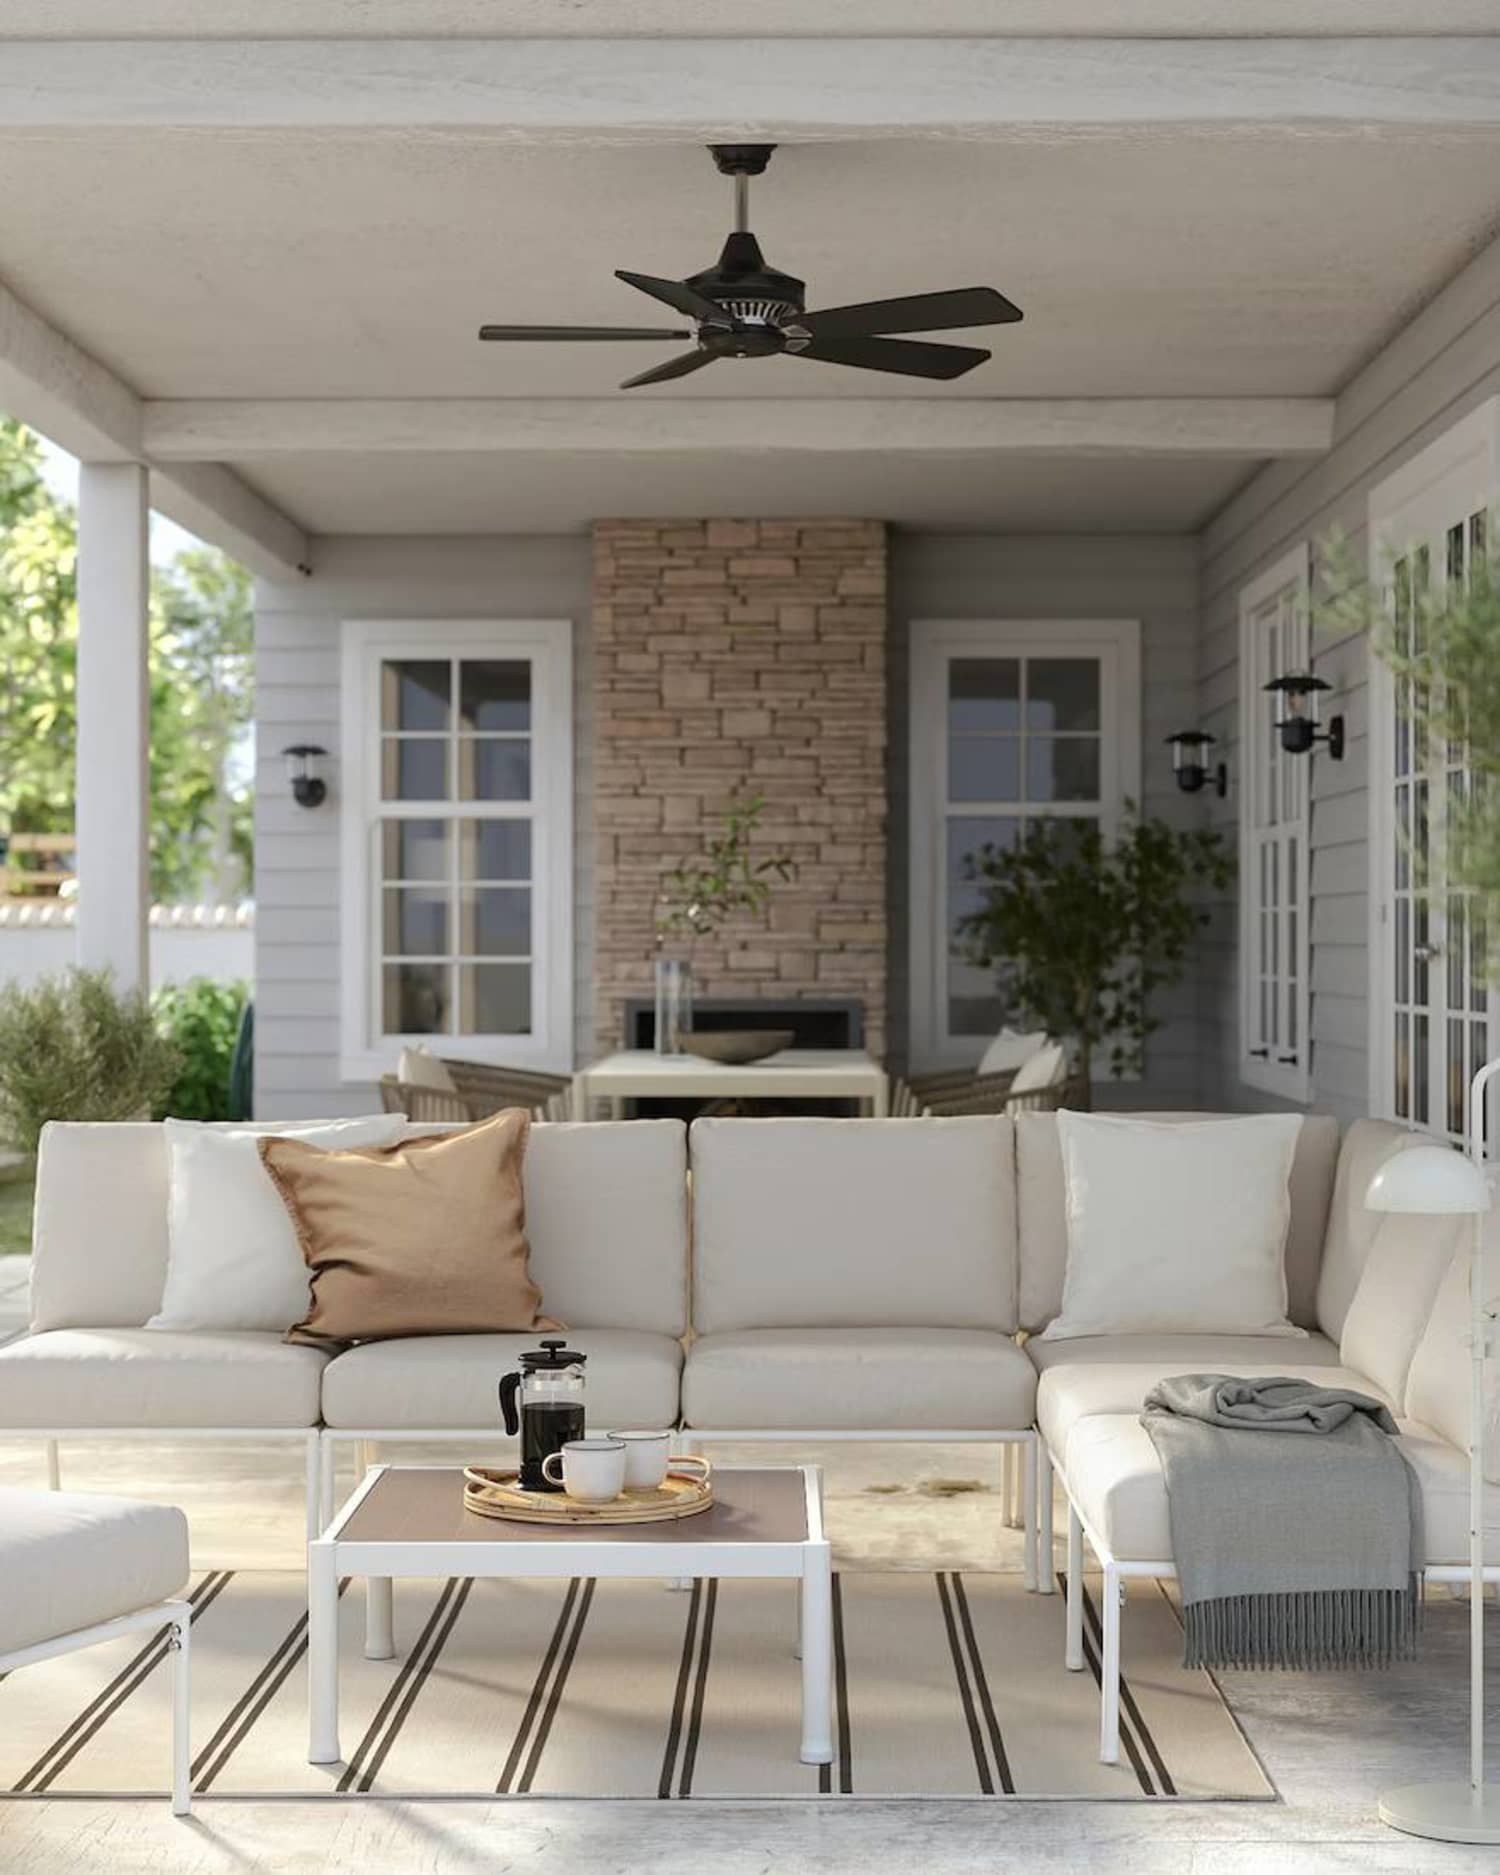 Tell Us How You Use Your Outdoor Space and We’ll Tell You How to Make It Better at IKEA